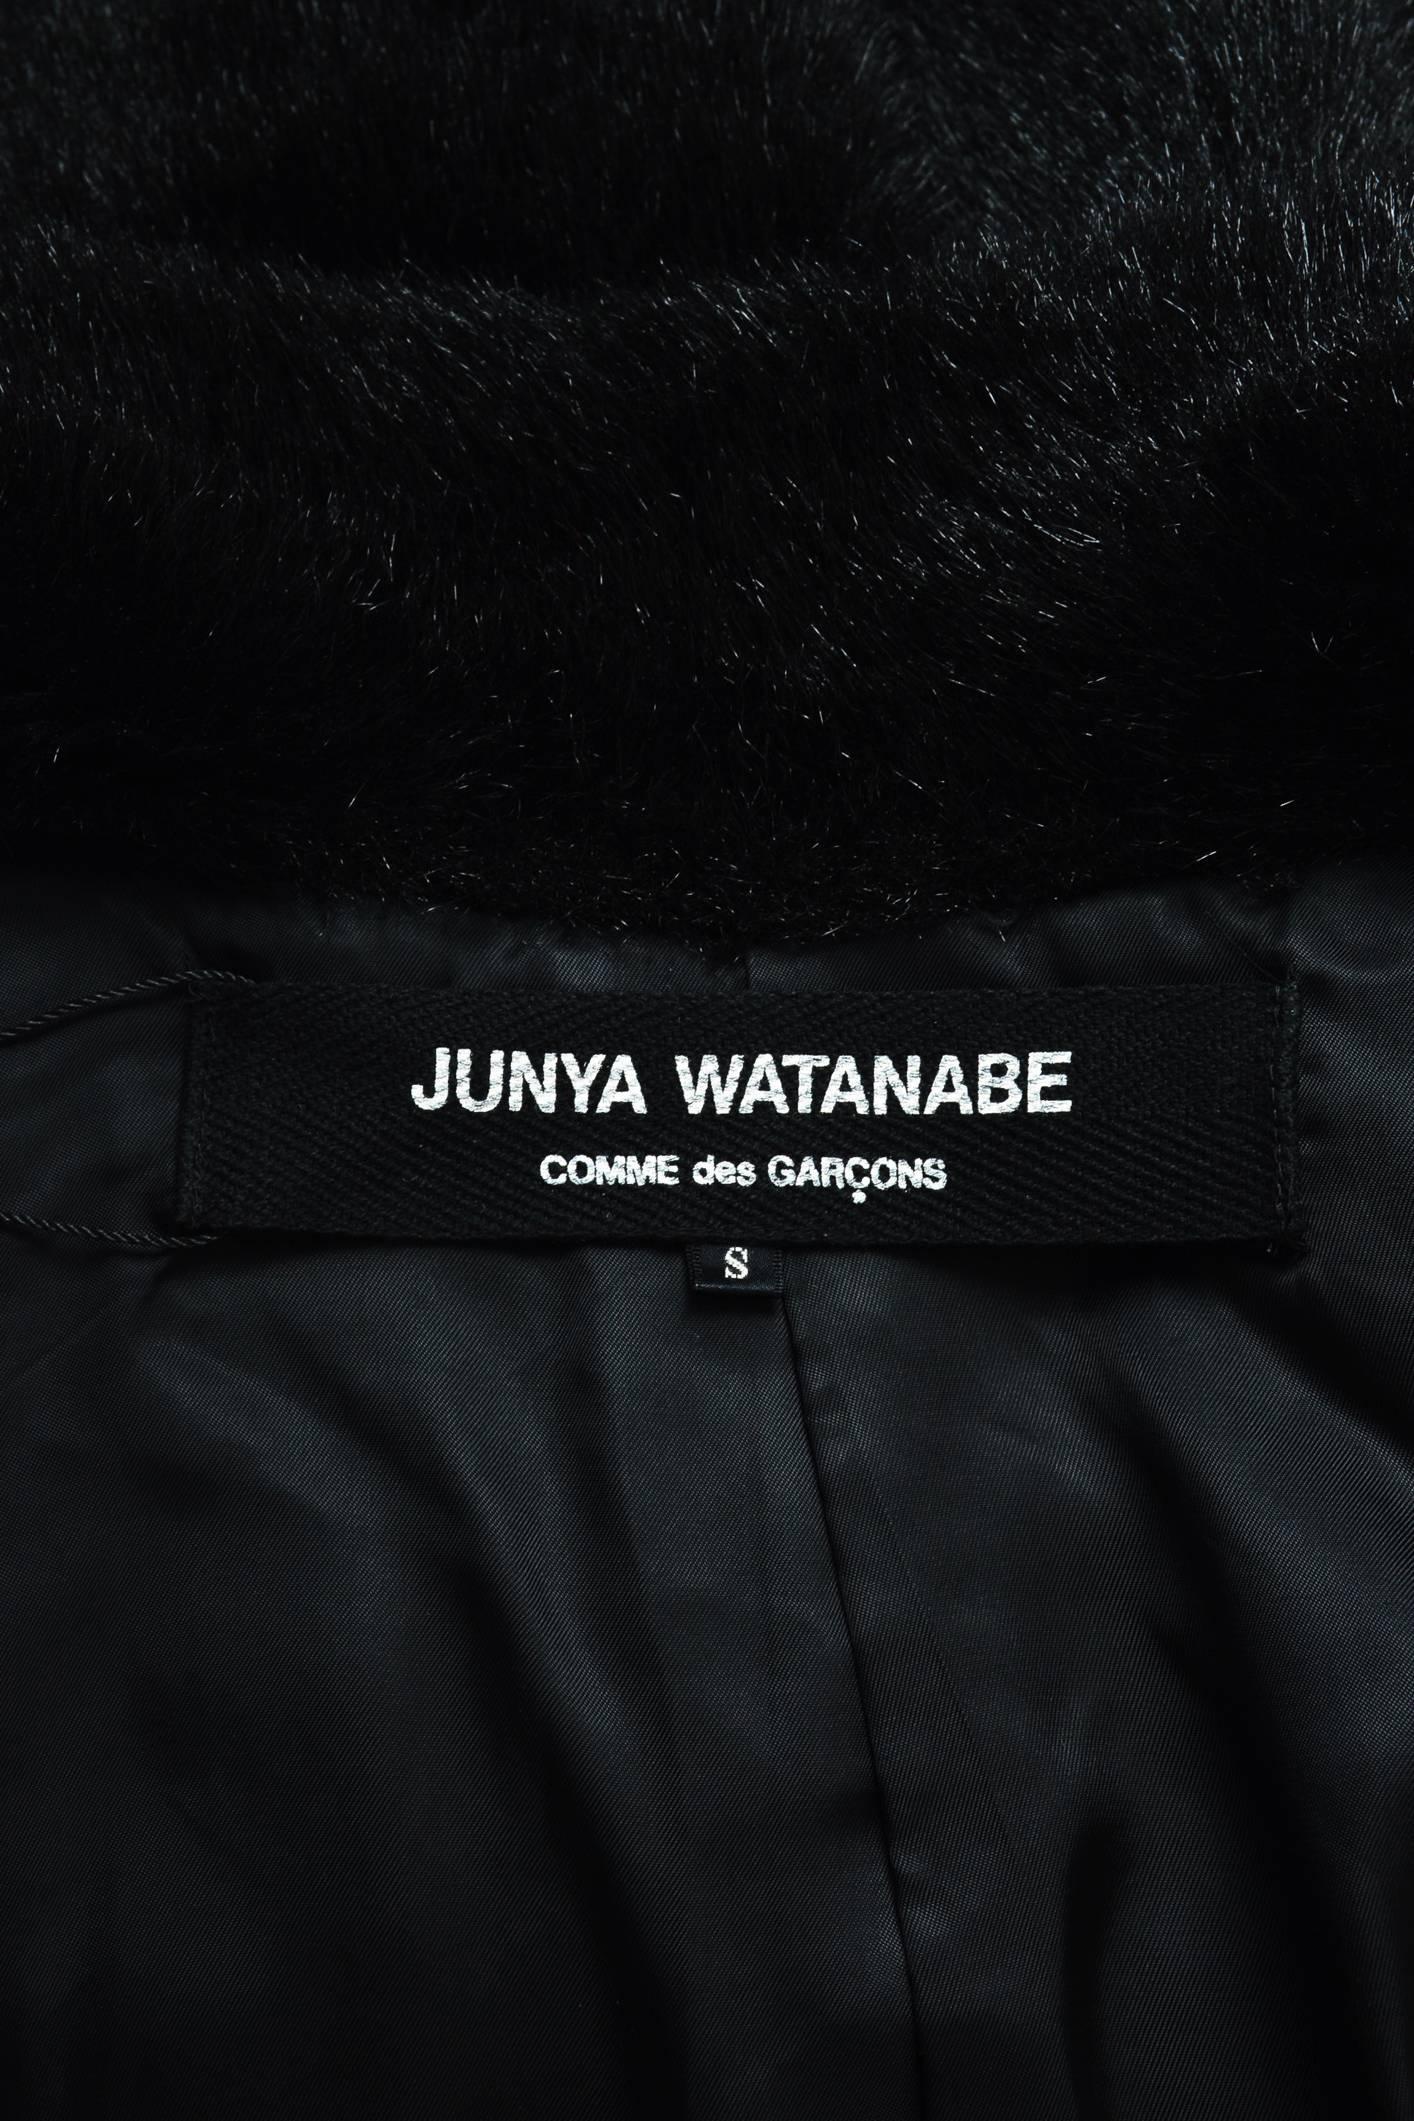 Junya Watanabe Comme des Garcons Black Faux Fur Sheer Panel Boxy Jacket SZ Small In Excellent Condition For Sale In Chicago, IL